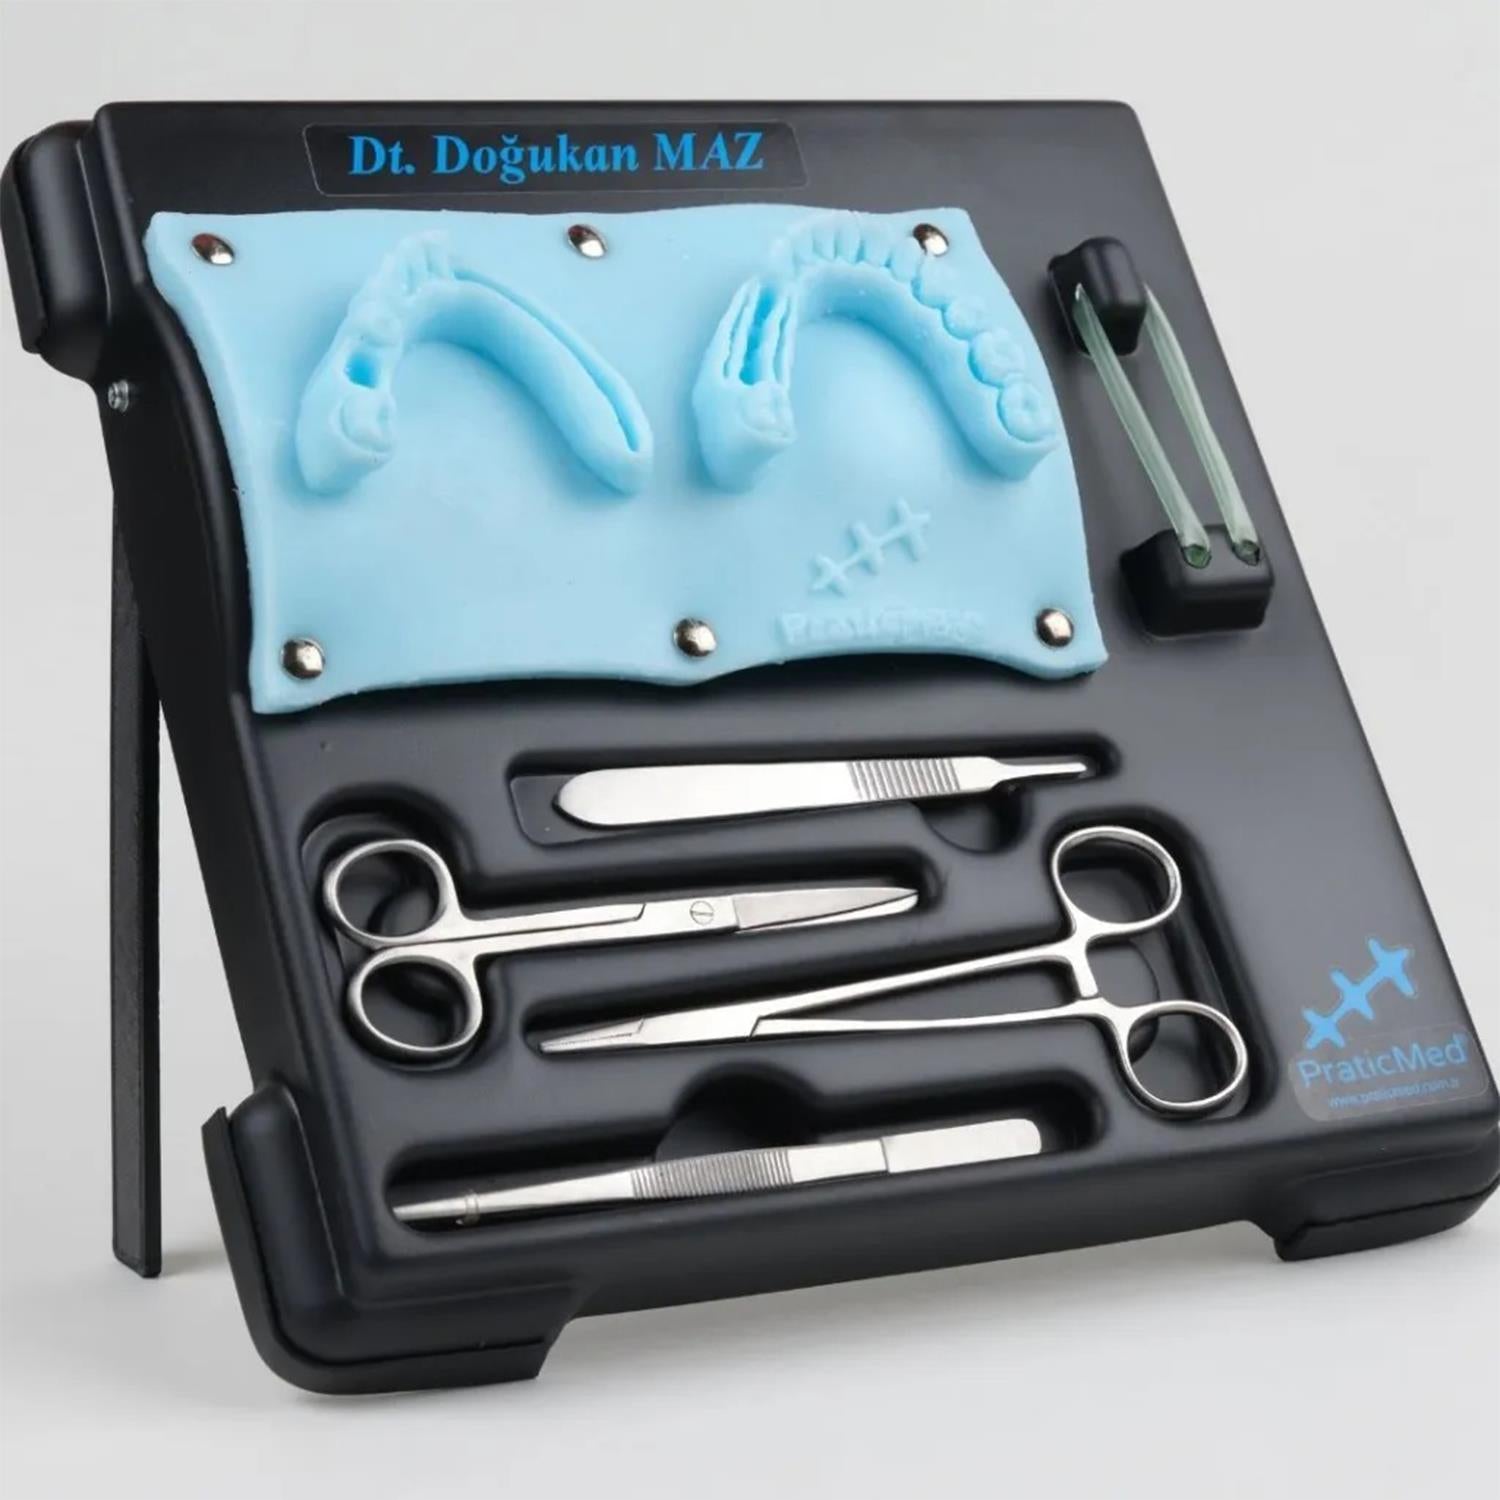 DentrealStore - Praticmed Dentistry Suture, Flap Closure Training Silicon Set - Table Type - Blue